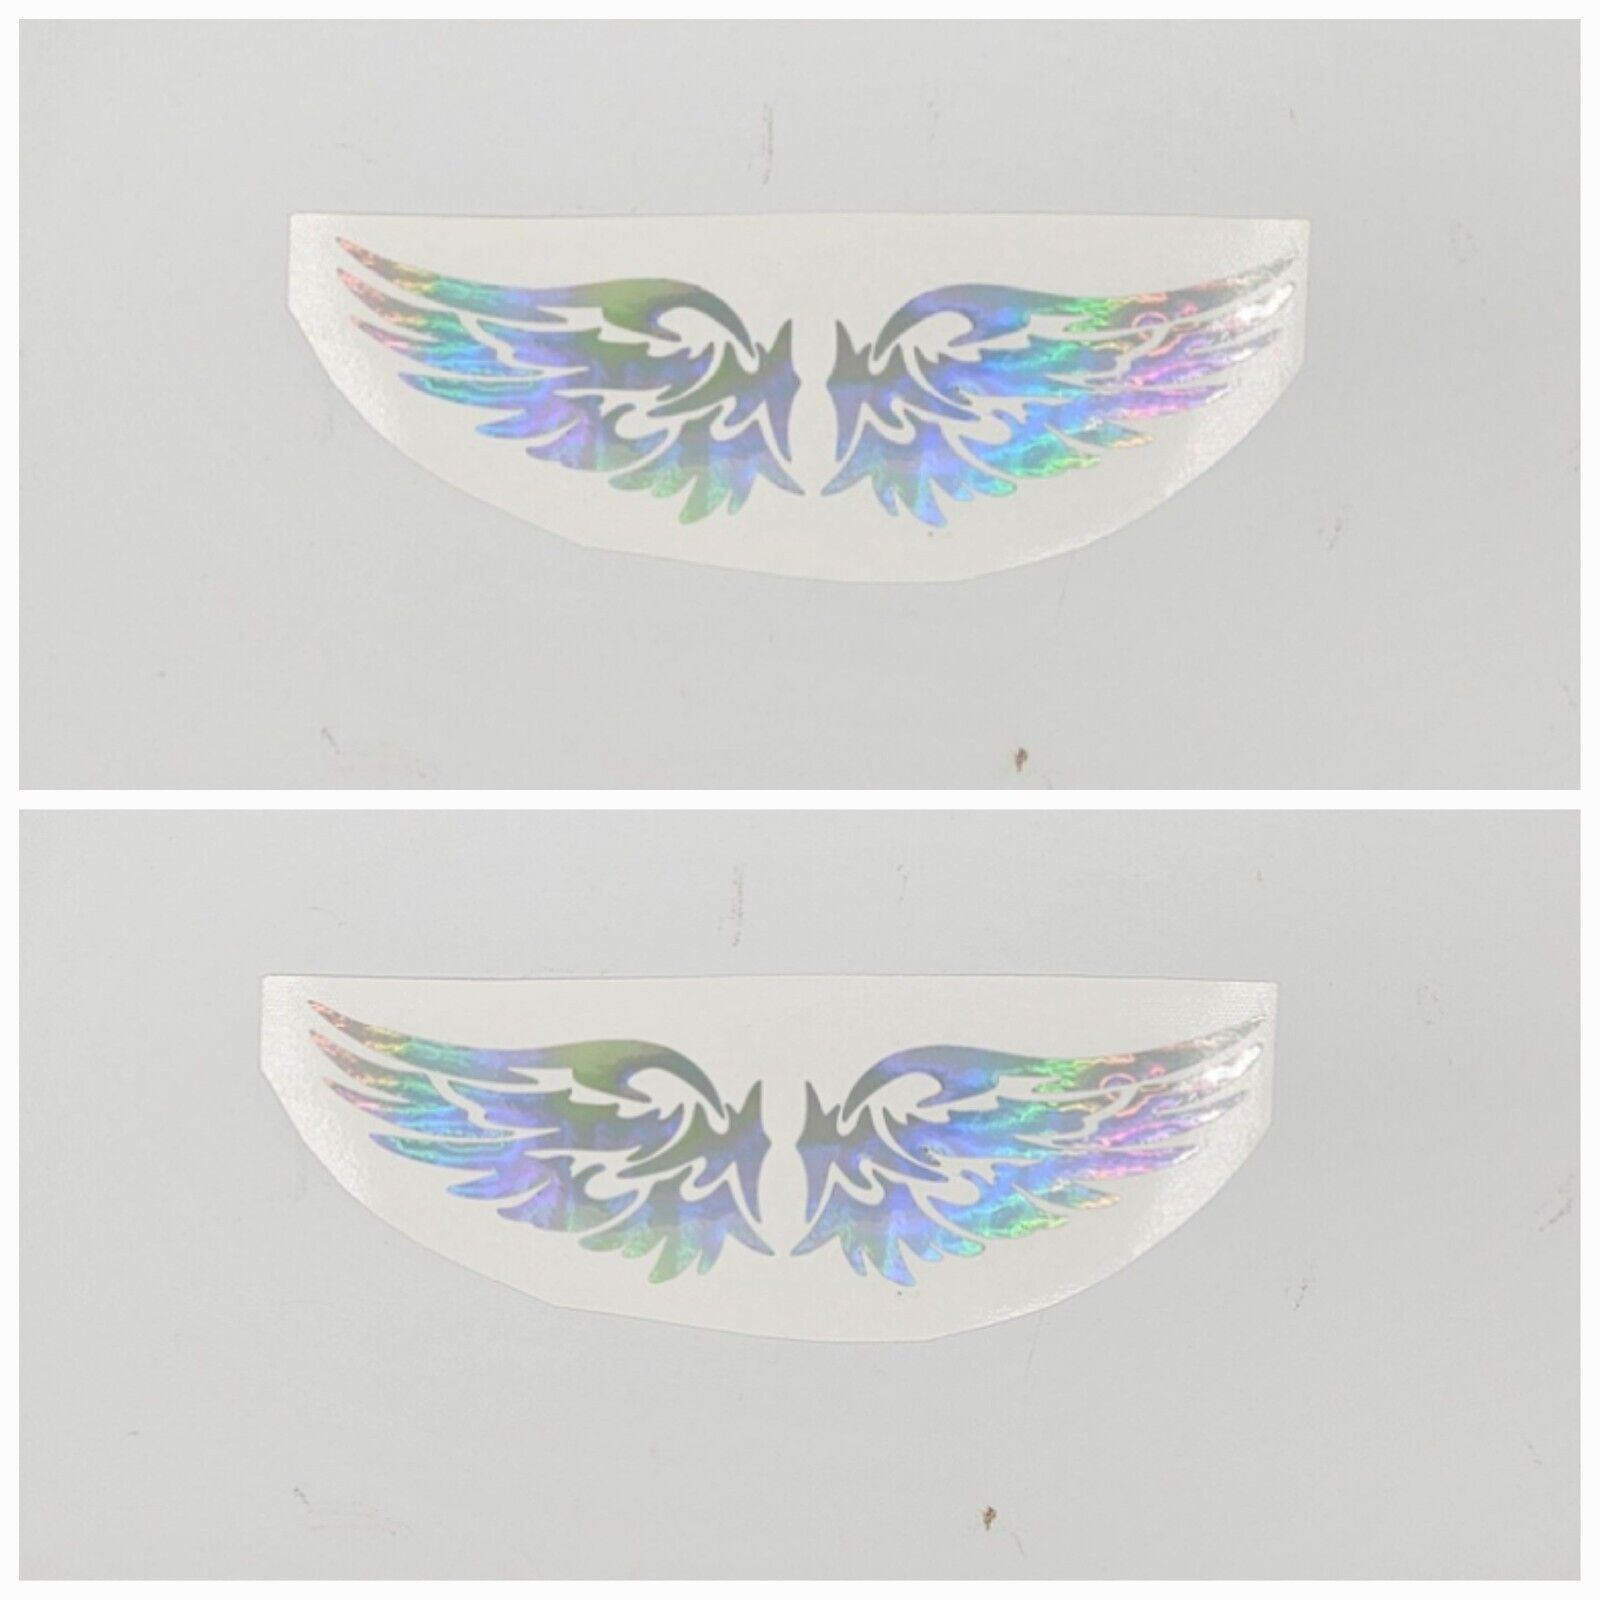 Holographic Tribal Angel Wings Decal Tribal Angel Wing Decal Holographic Wings